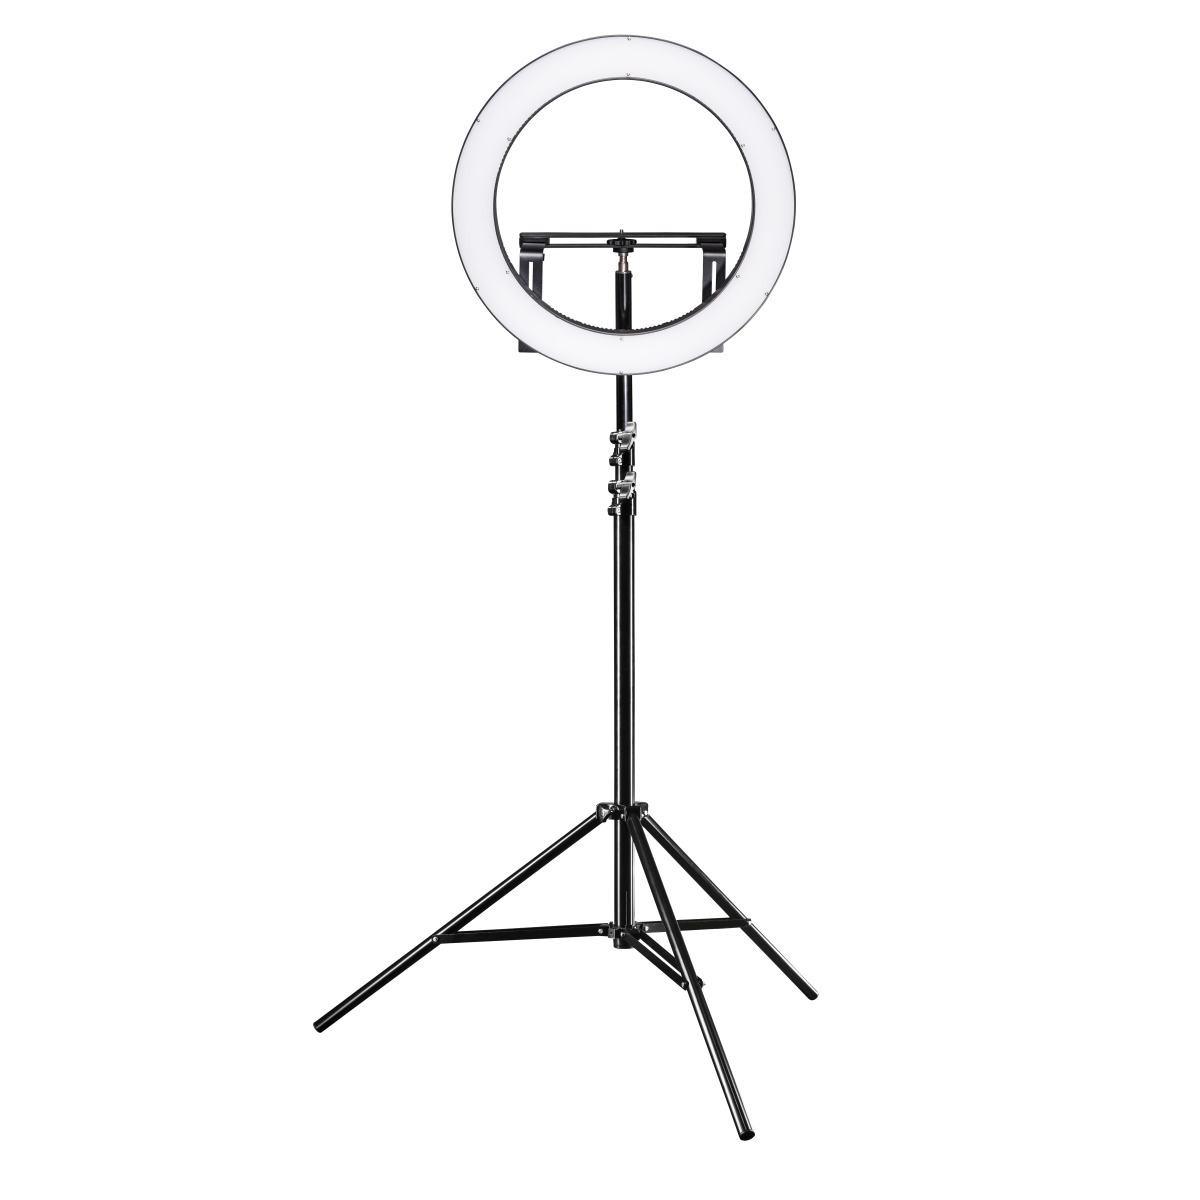 Ring Light Videos, Download The BEST Free 4k Stock Video Footage & Ring  Light HD Video Clips